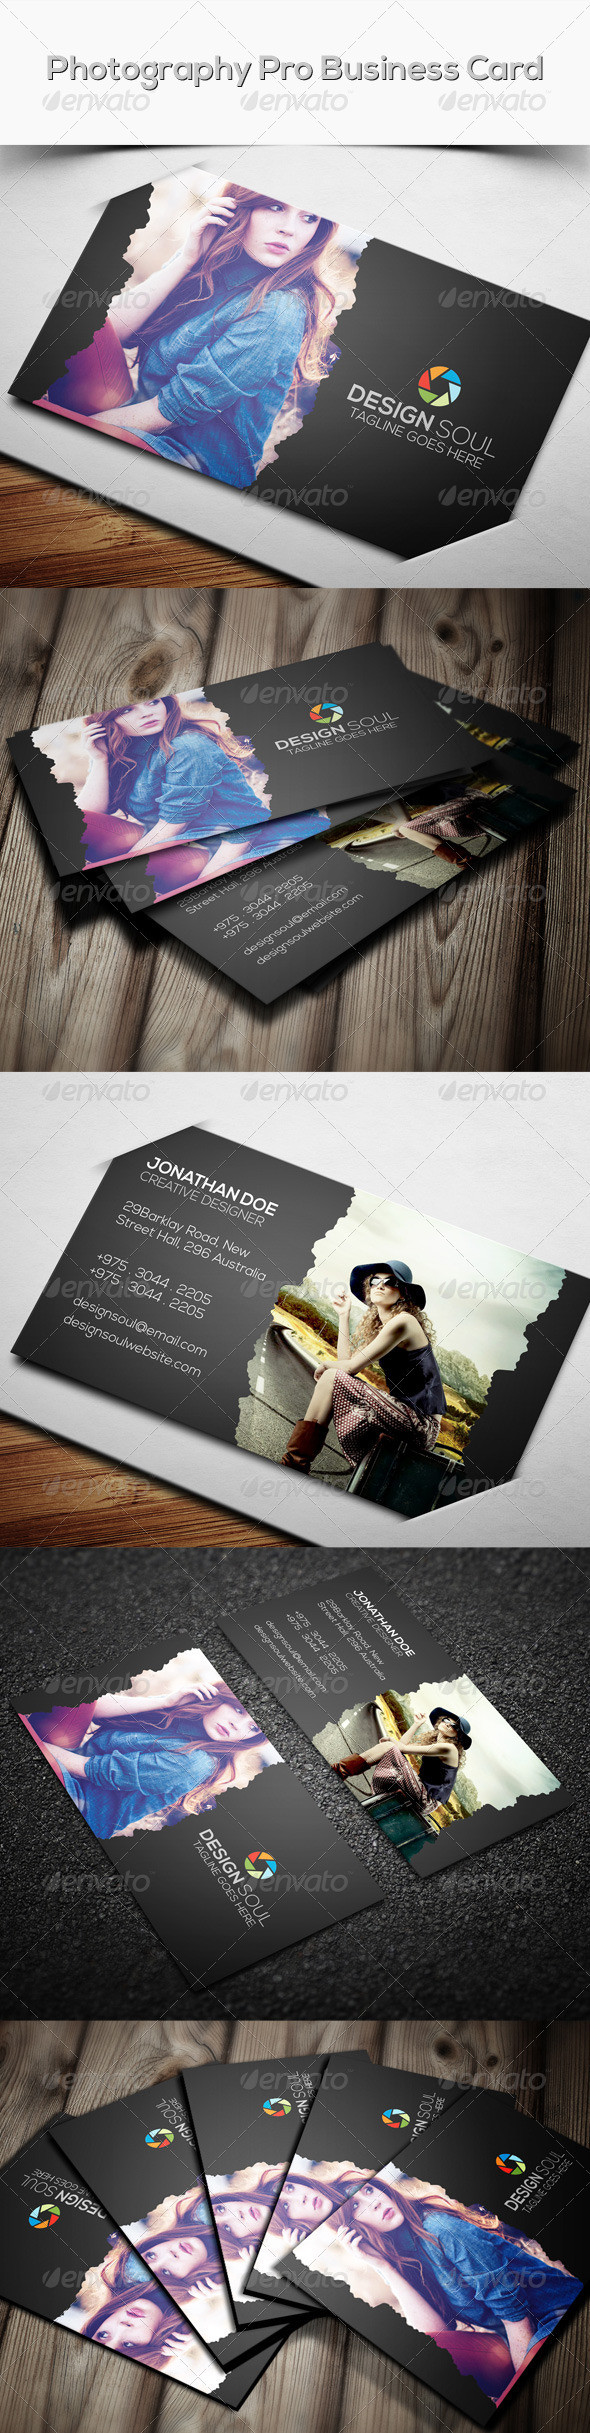 Photography pro business card preview